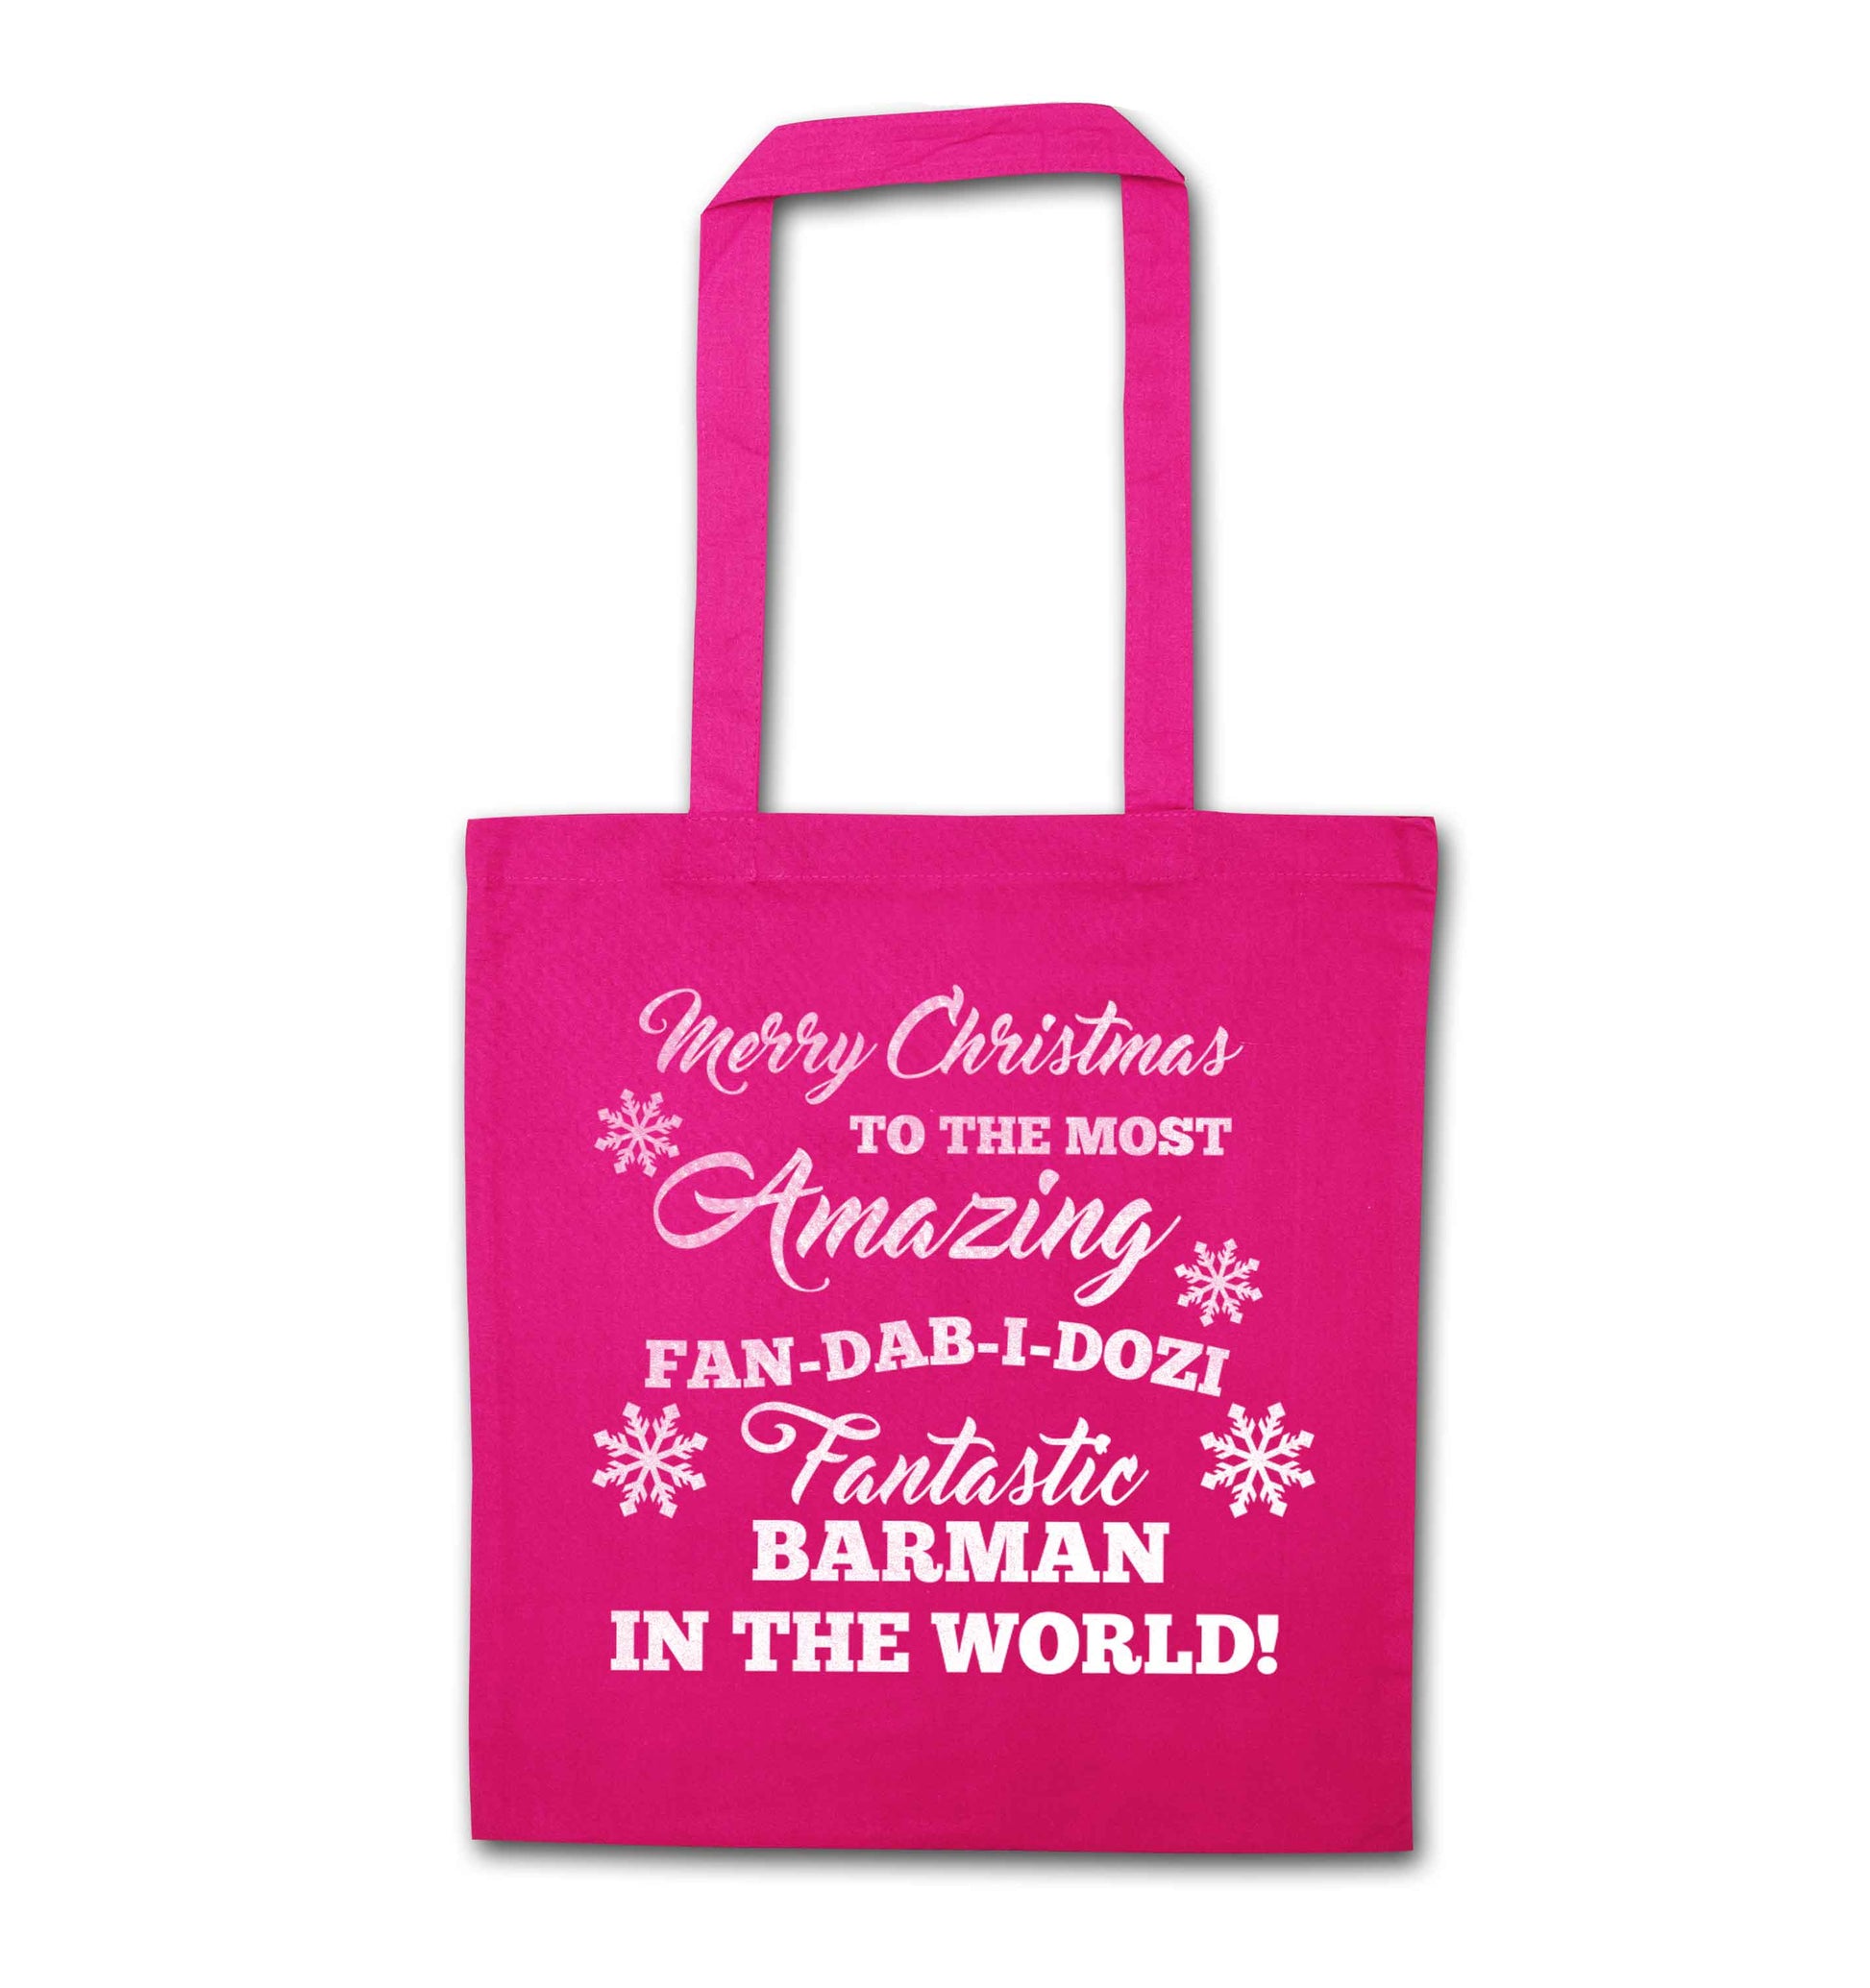 Merry Christmas to the most amazing barman in the world! pink tote bag